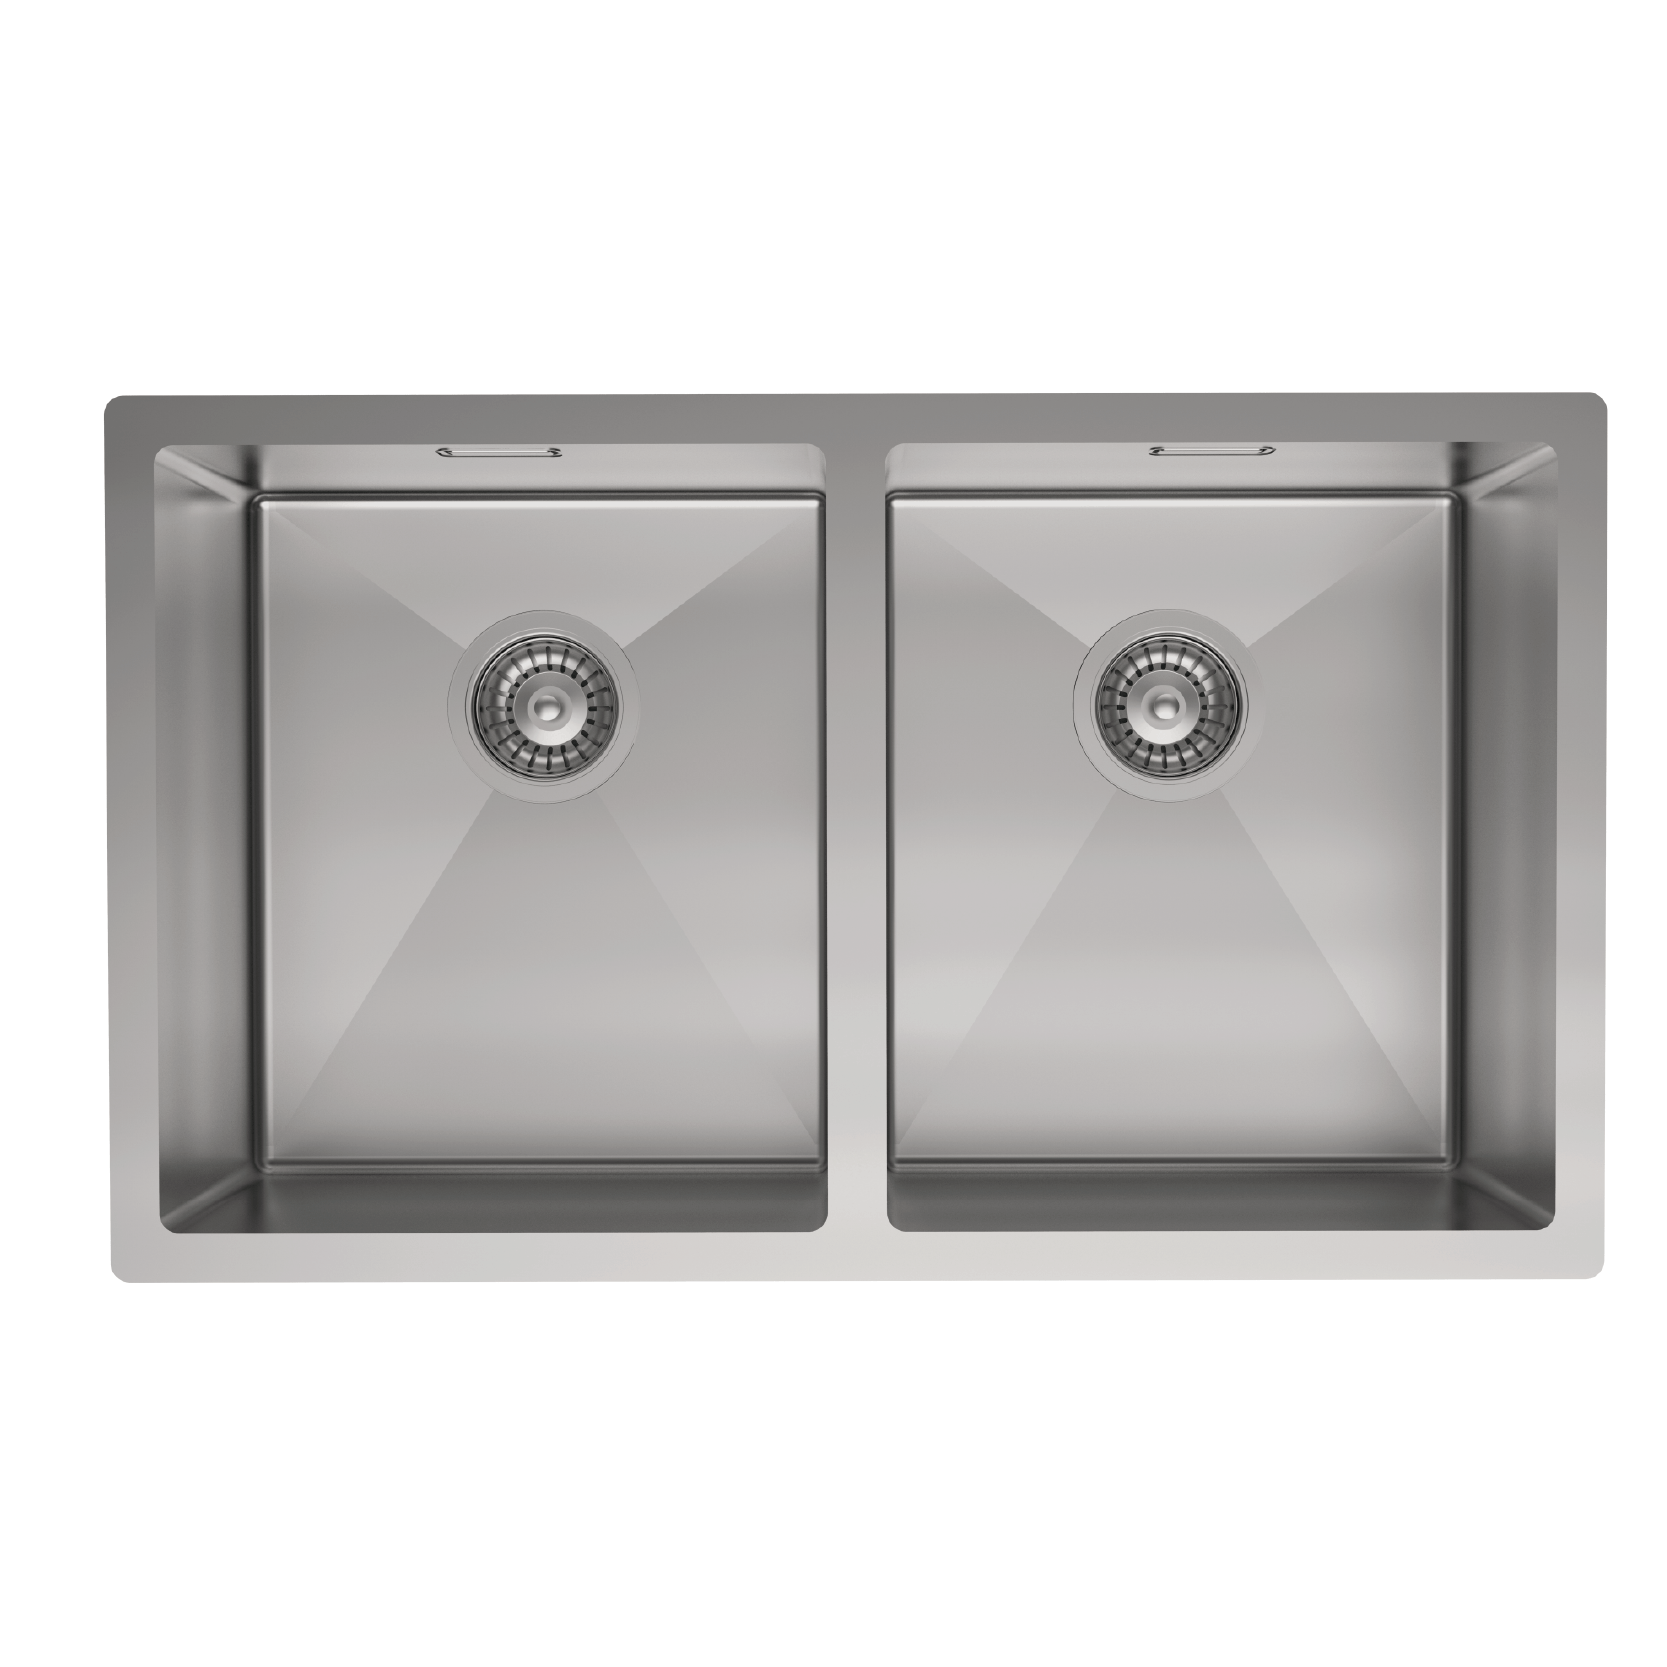 Bexley Brushed Nickel Double Bowl 760mm